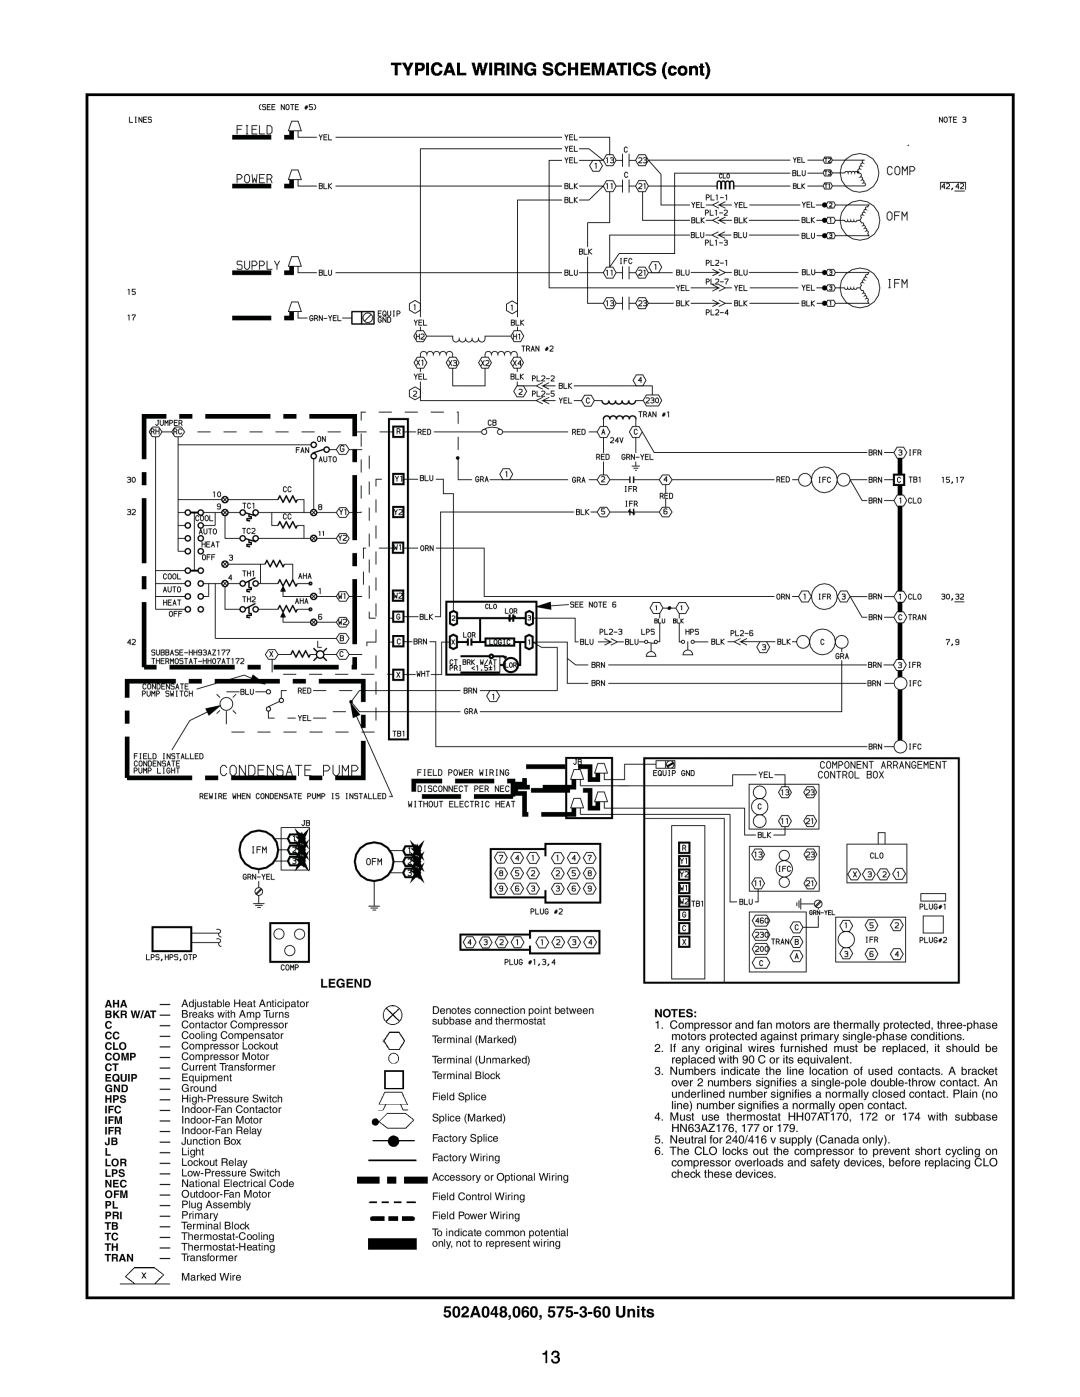 Bryant manual 502A048,060, 575-3-60Units, TYPICAL WIRING SCHEMATICS cont 